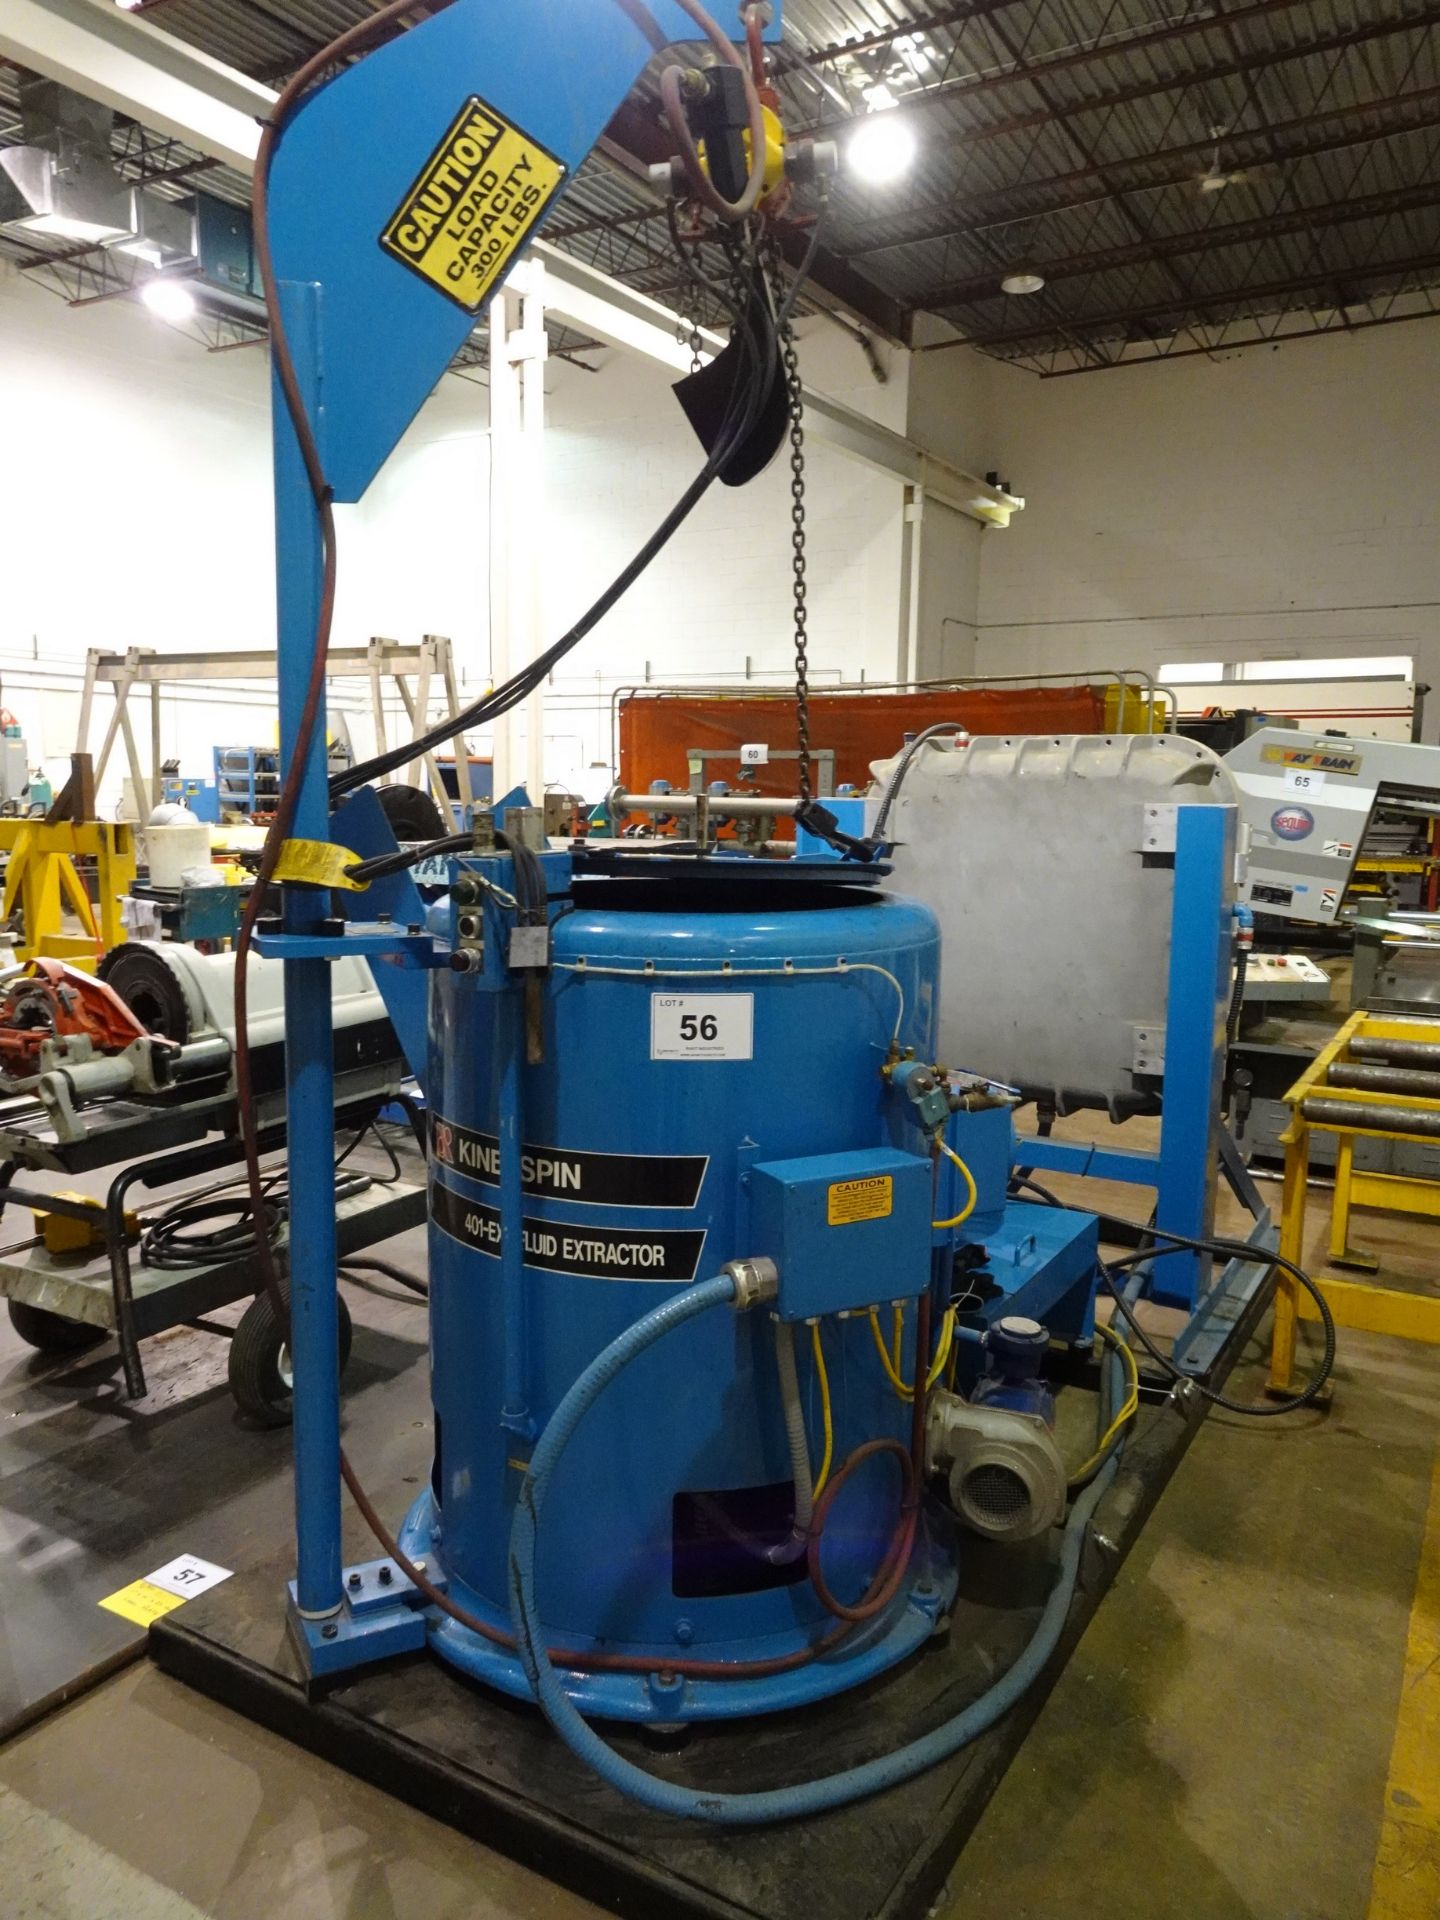 KINE-SPIN MODEL 401-EXP FLUID EXTRACTOR SYSTEM SKID MOUNTED, 3/60/575 VOLTS, S/N 4010328-EXP (